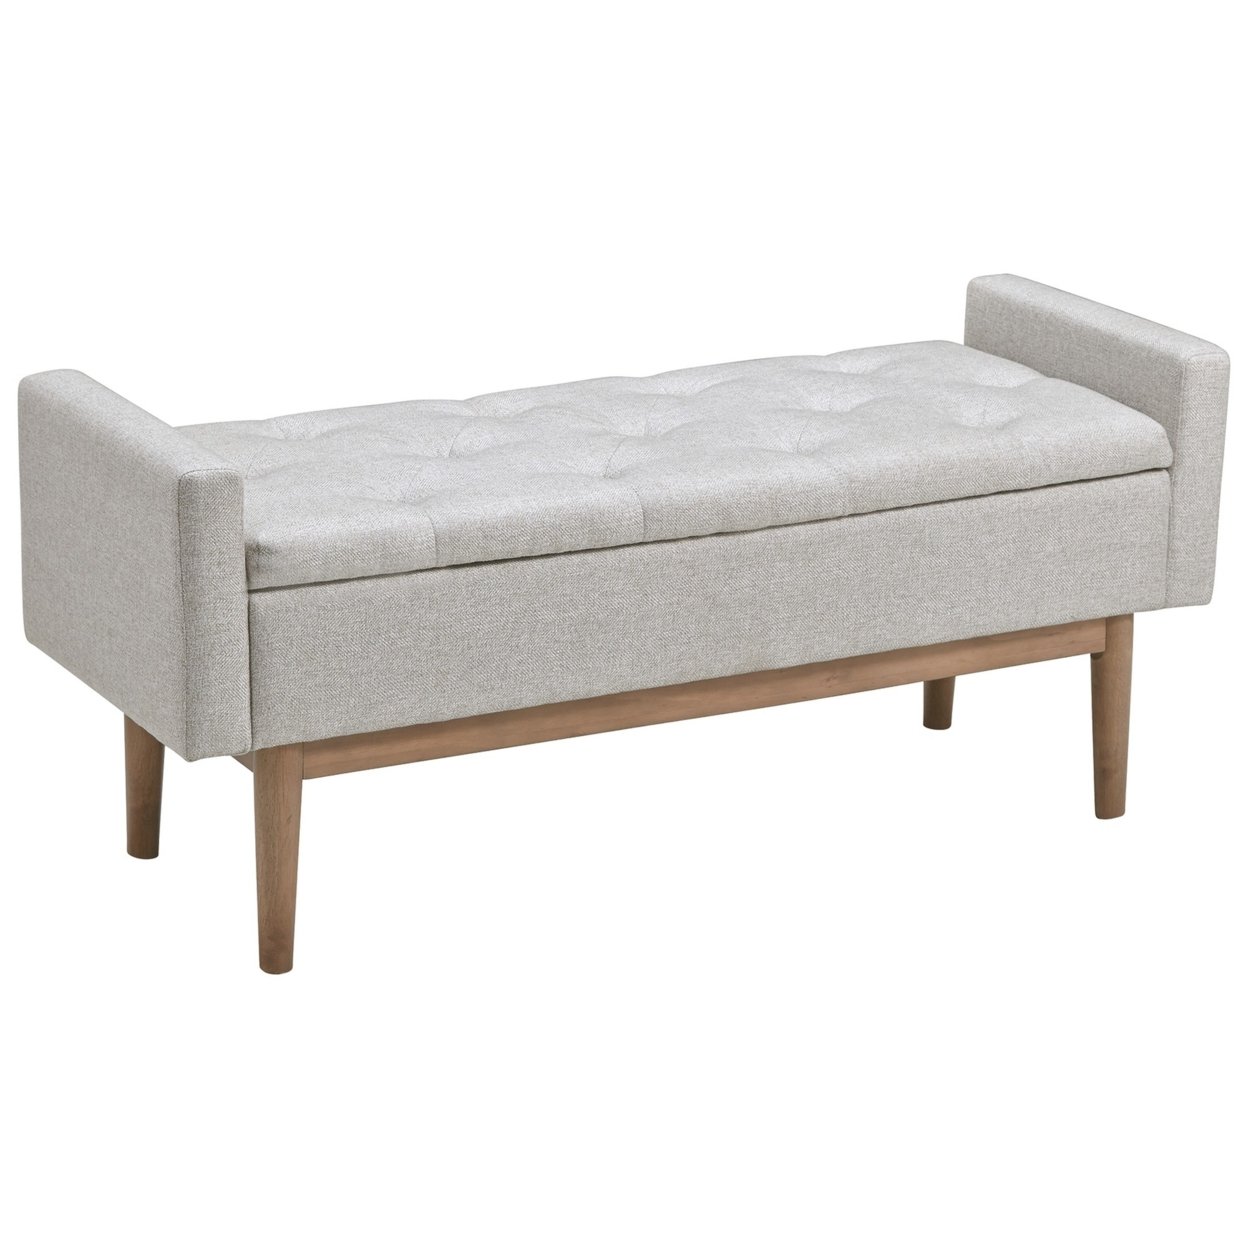 Saltoro Sherpi Tufted Fabric Storage Bench with Low Profile Elevated Arms, Light Gray